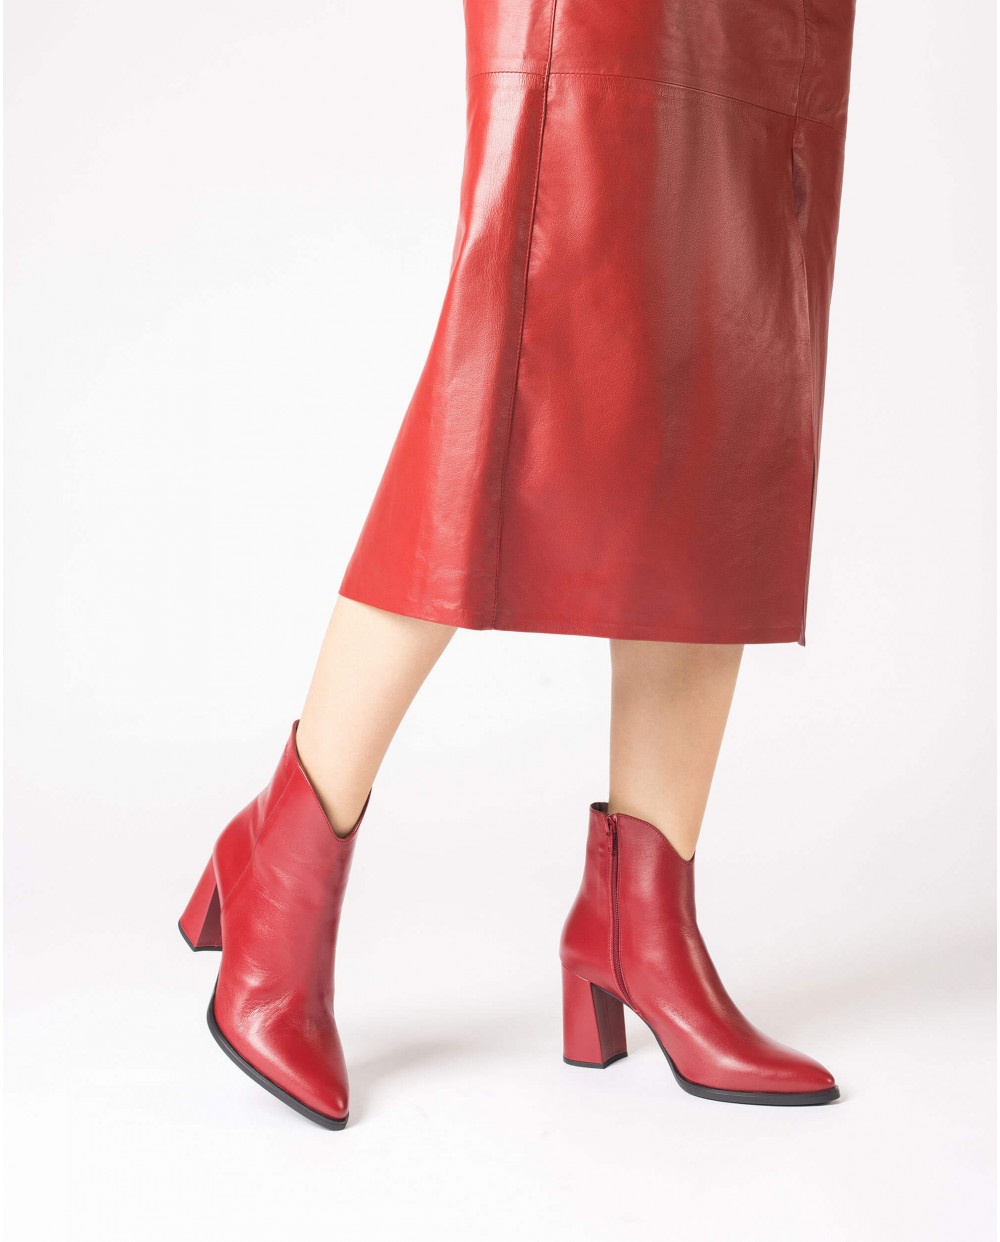 Wonders-Ankle Boots-Burgundy NARA ankle boot